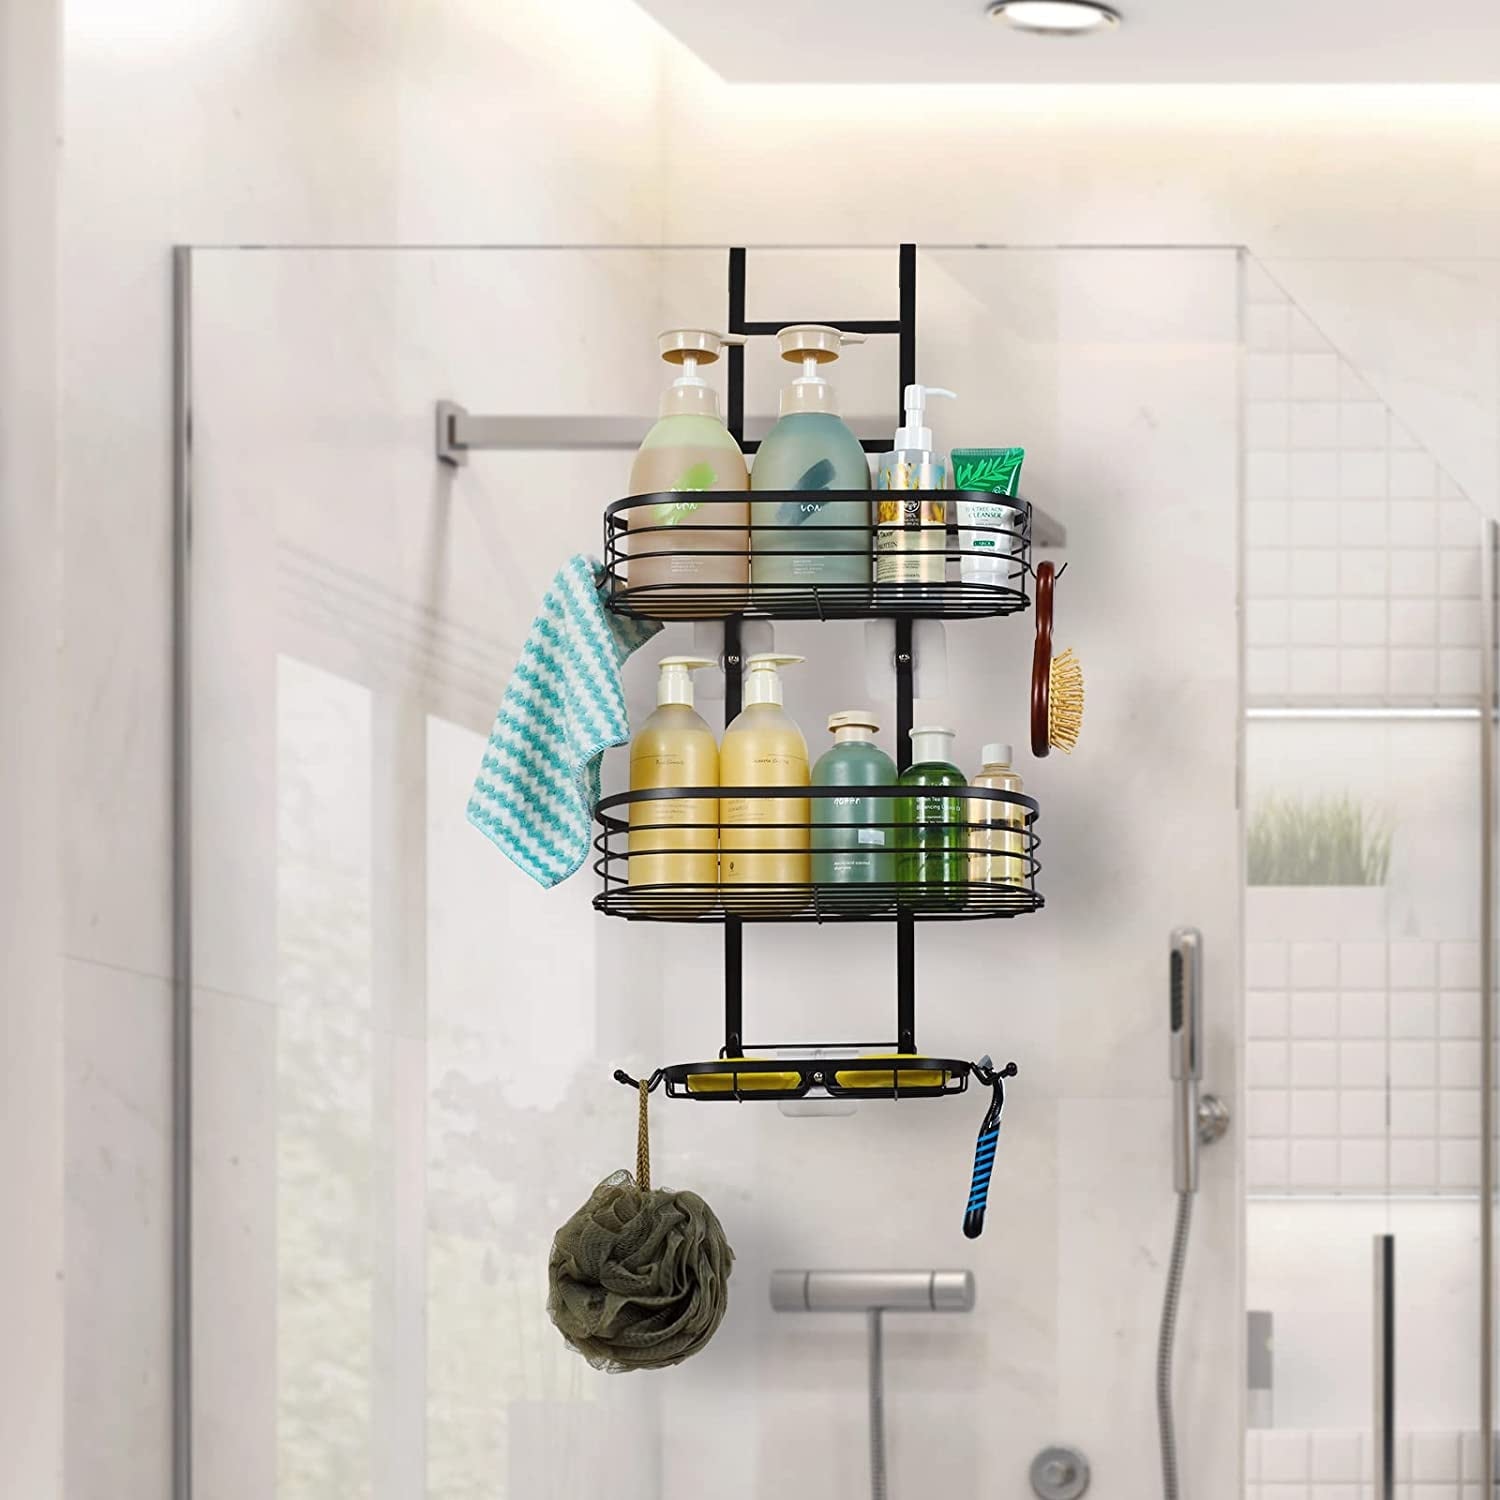 https://ak1.ostkcdn.com/images/products/is/images/direct/32dccbe7c12ea33e021eb6bcdad0ae42375799bd/Over-the-Door-Shower-Caddy.jpg